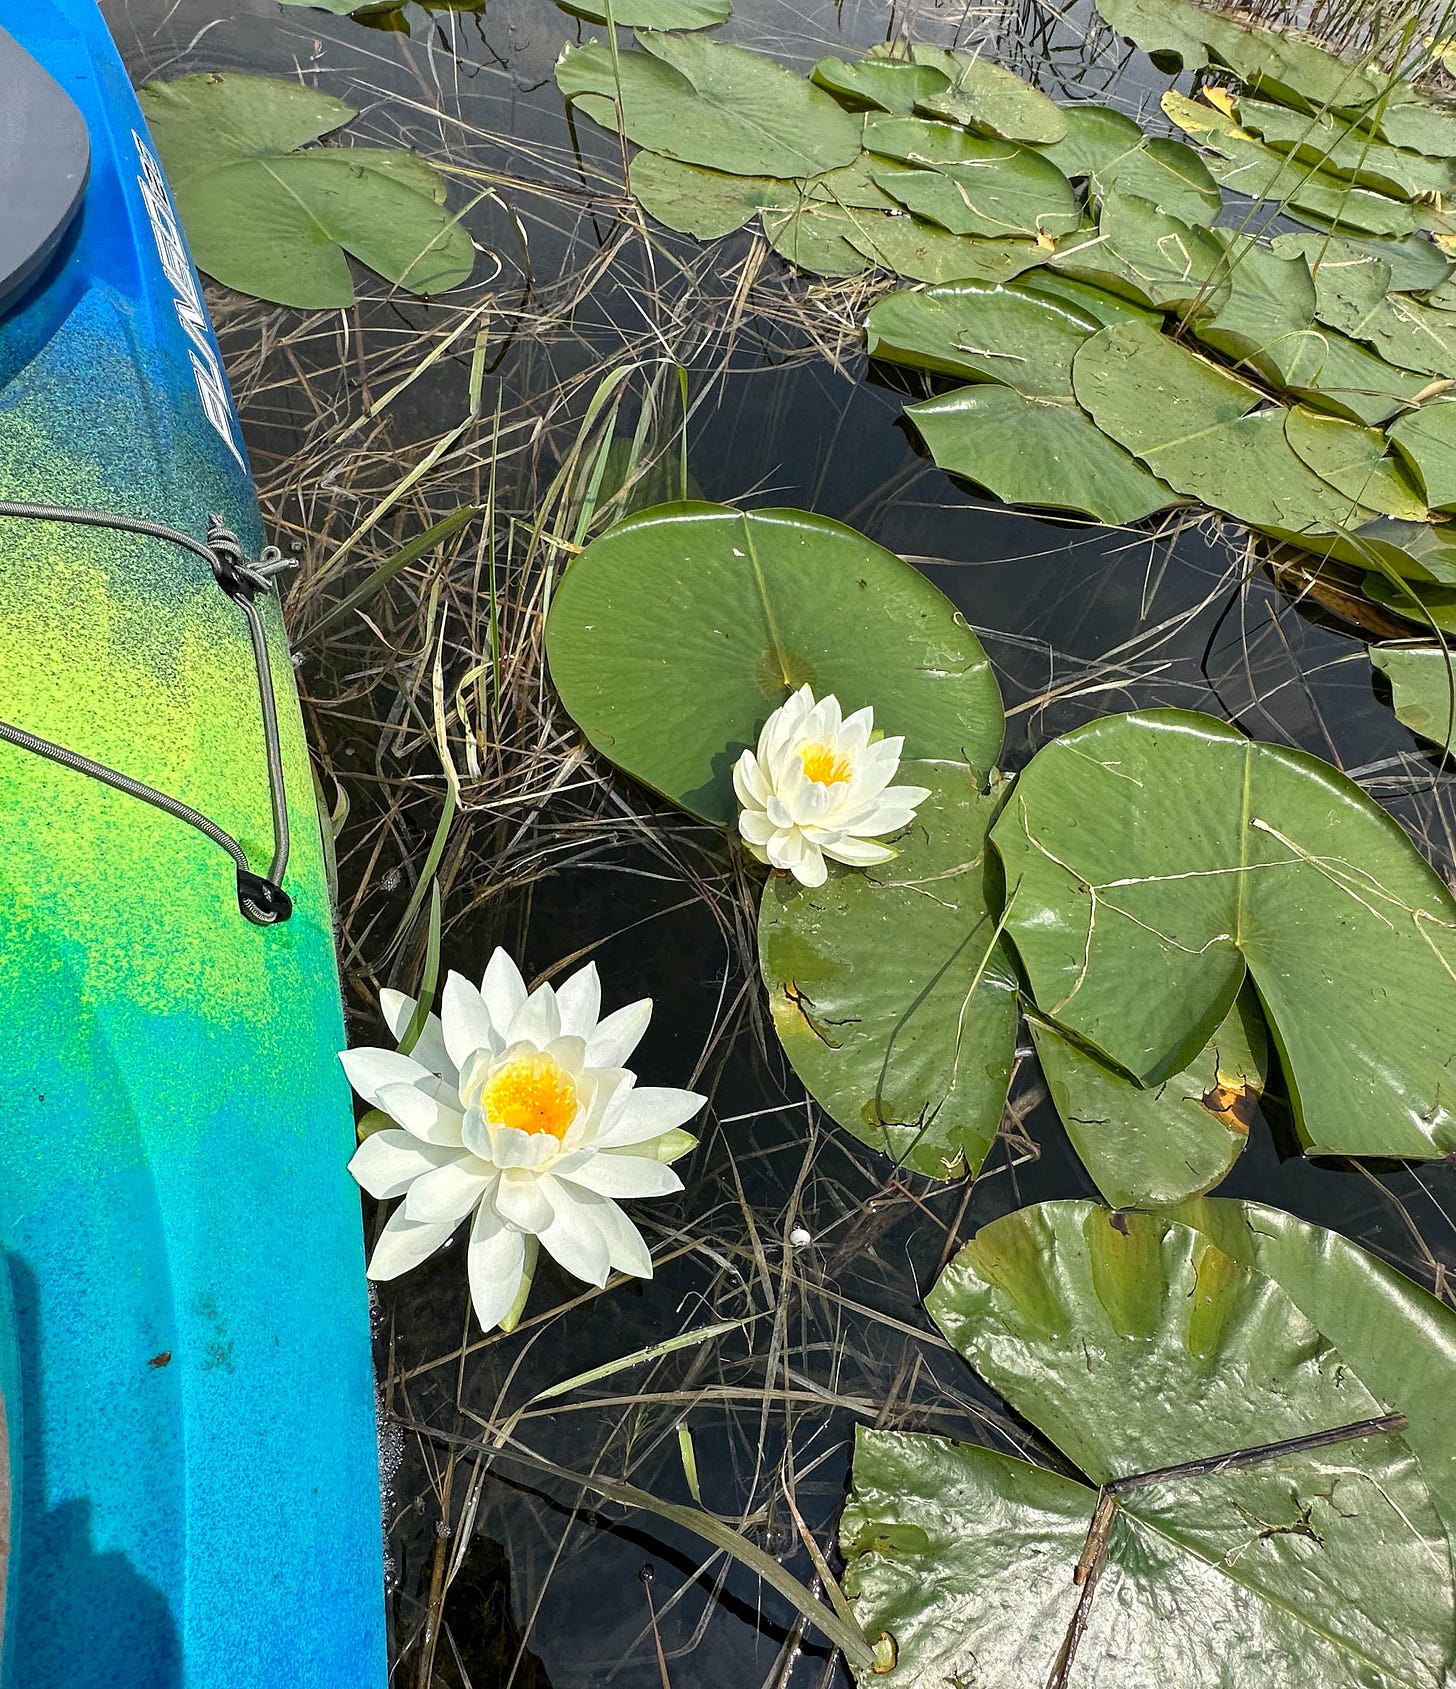 View looking down from blue kayak on two water lilies among many lily pads.